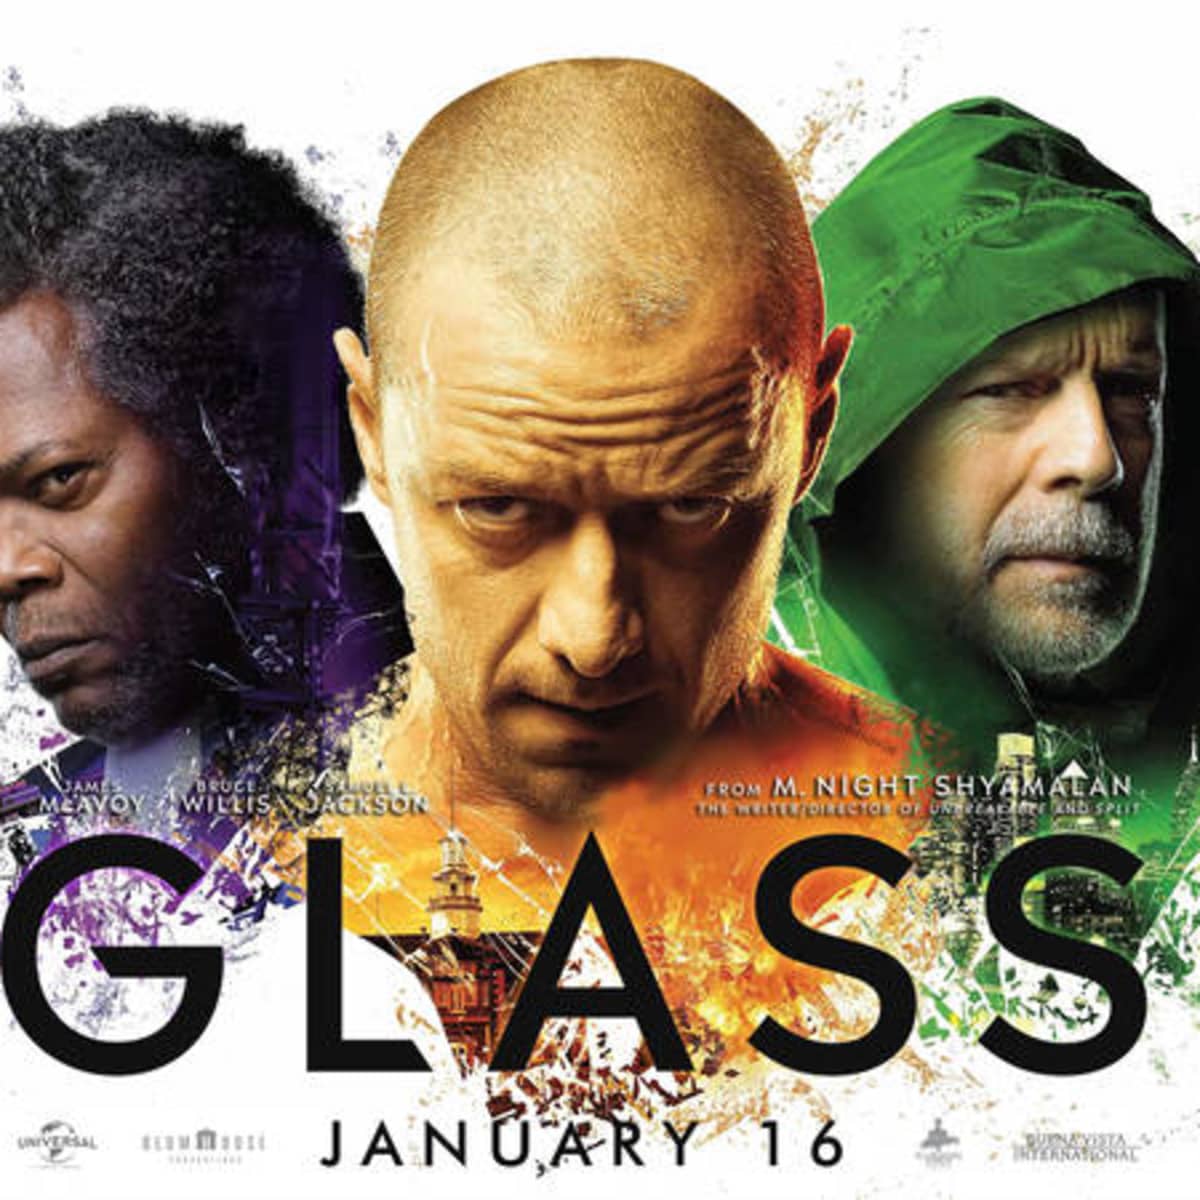 Glass 2019 Movie Wallpapers